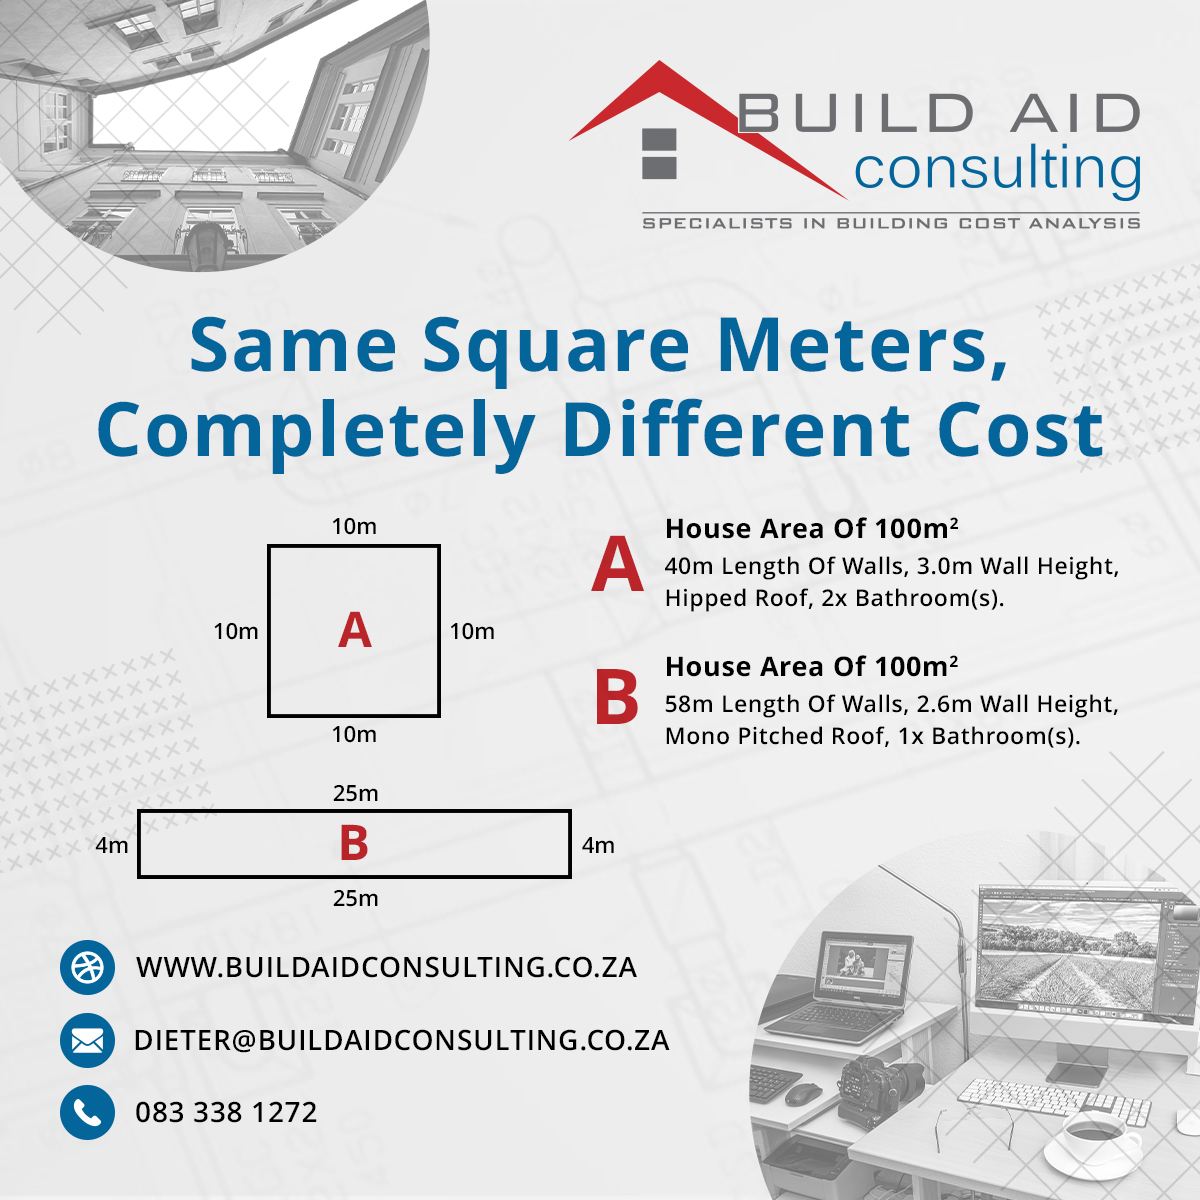 Building Costing